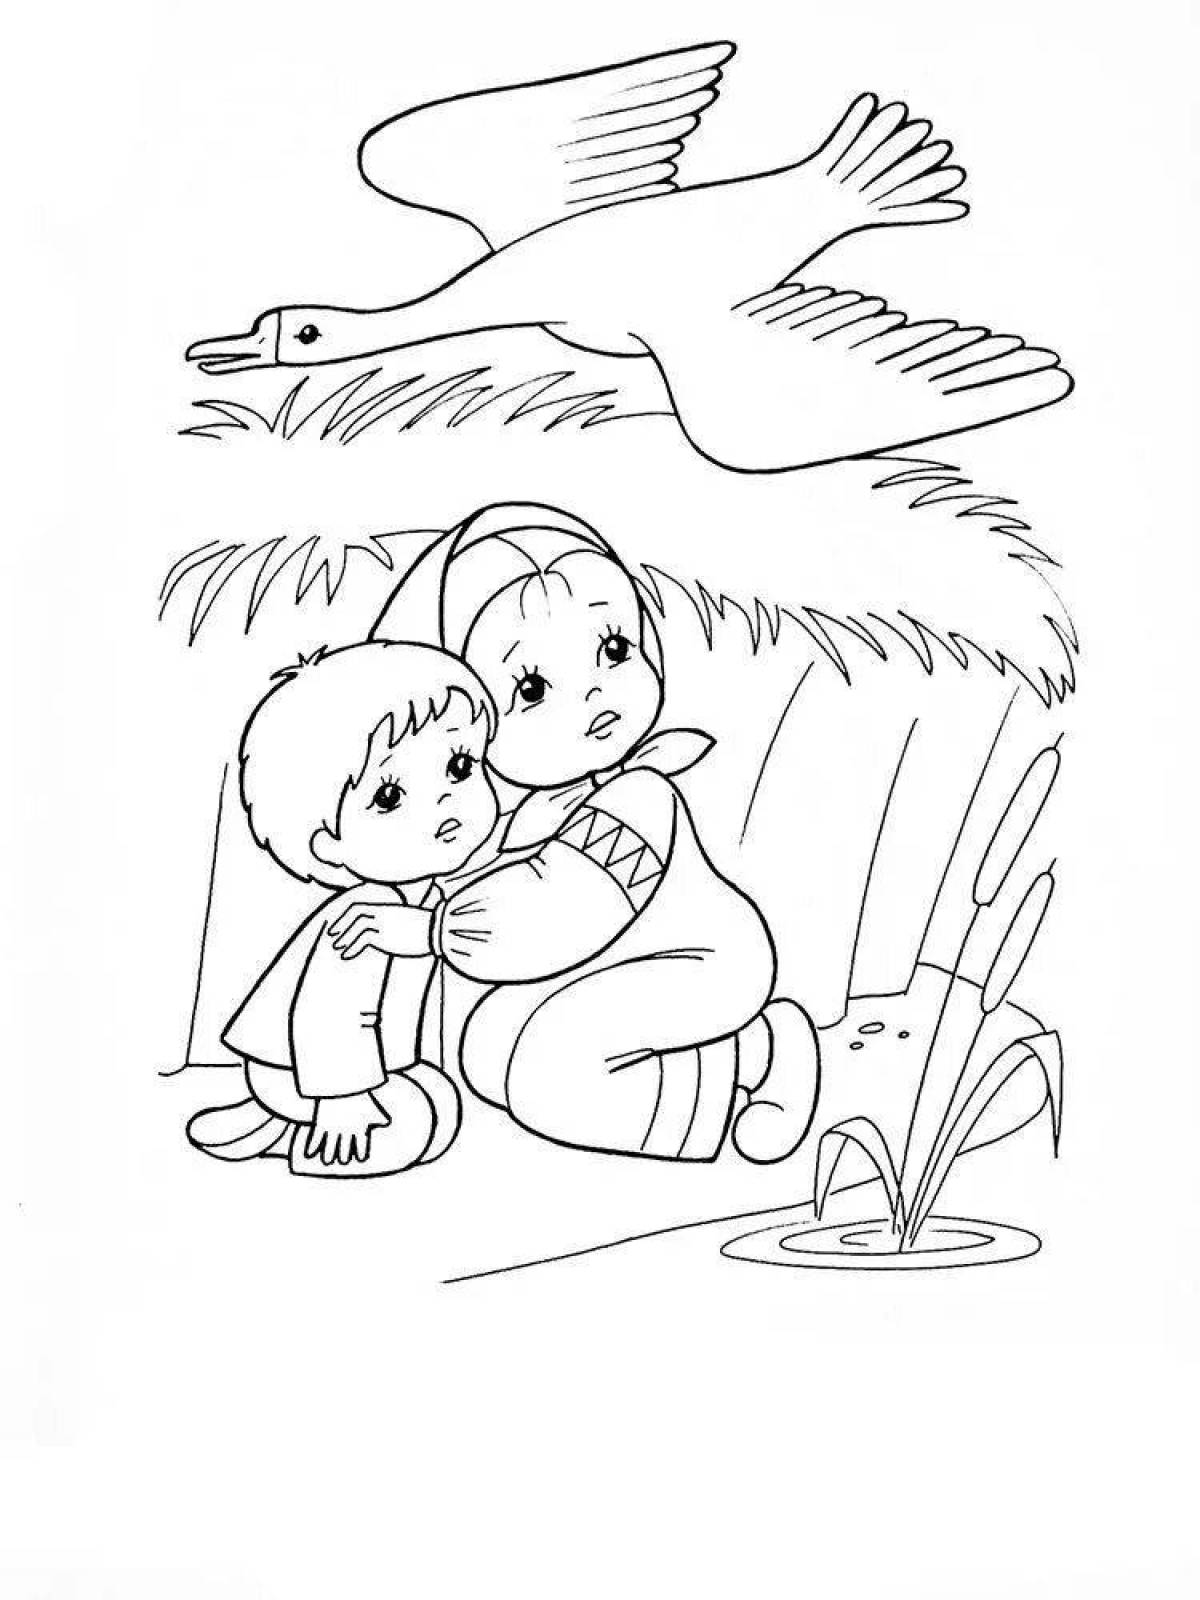 Coloring page surreal fairy tale 